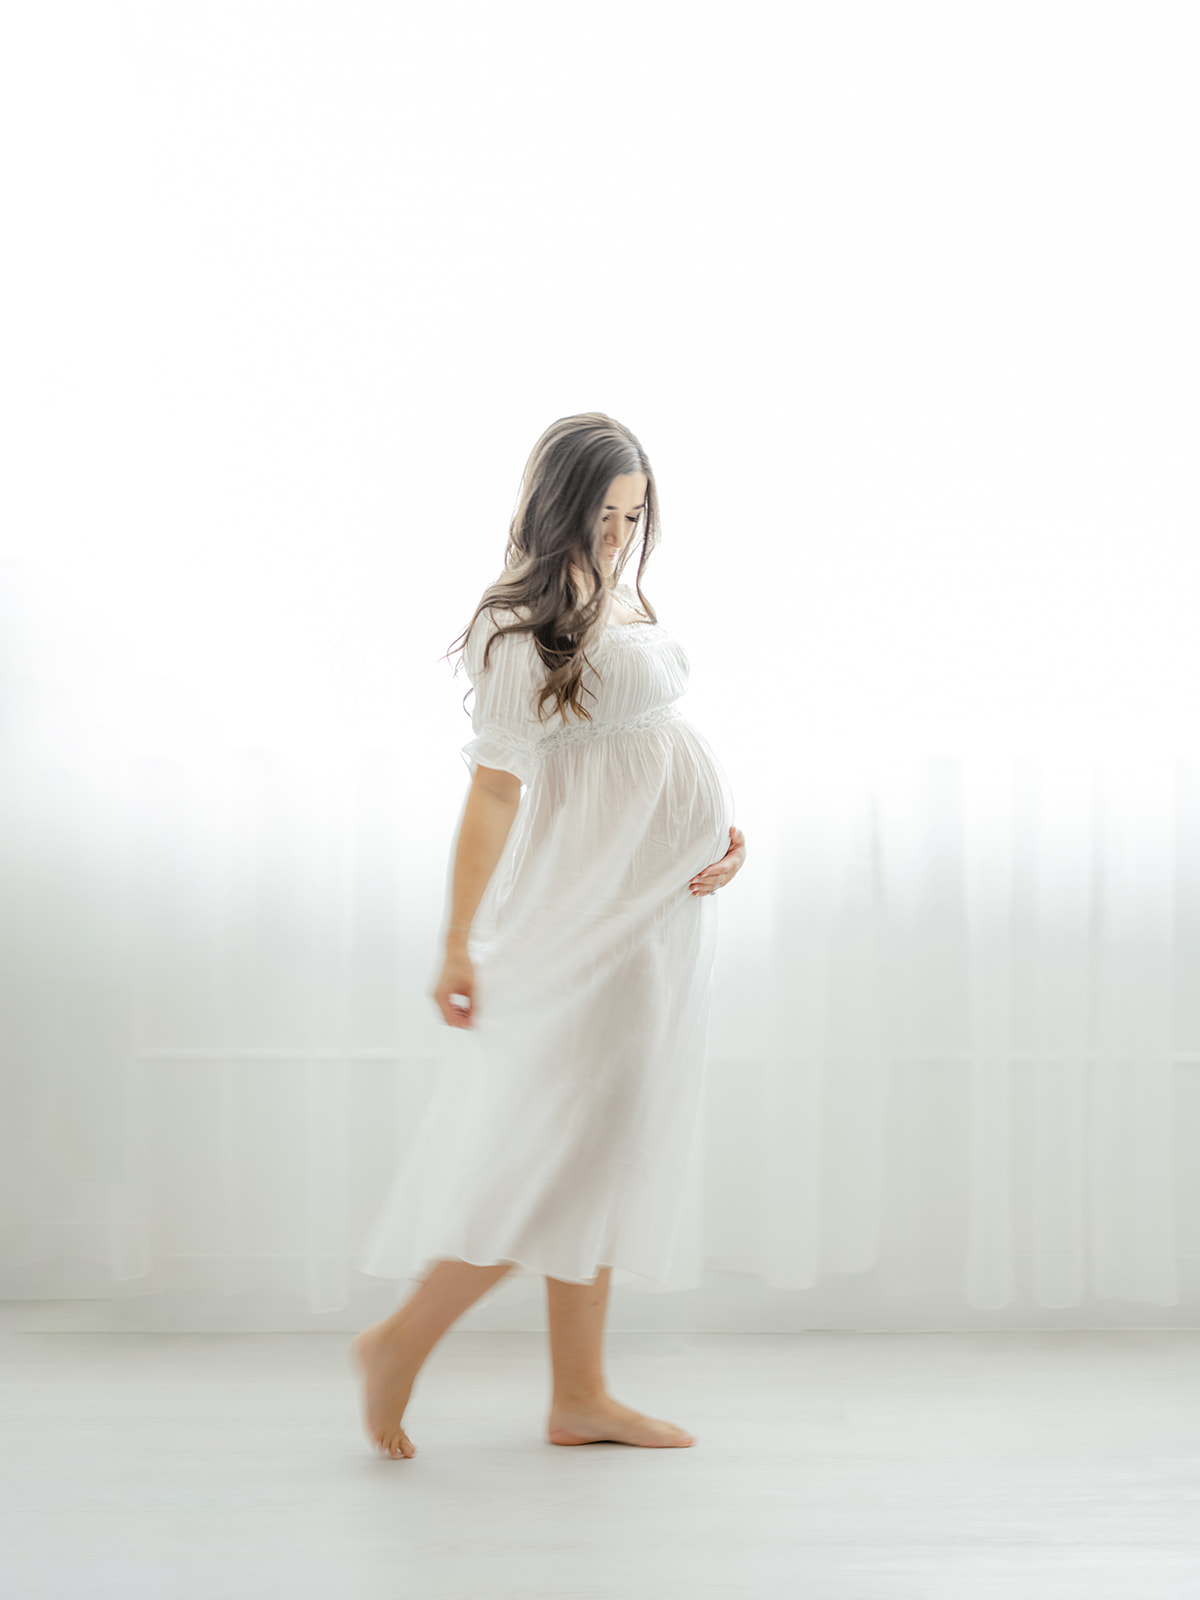 A mother to be walks in a studio in a white maternity dress after meeting Dallas Midwives